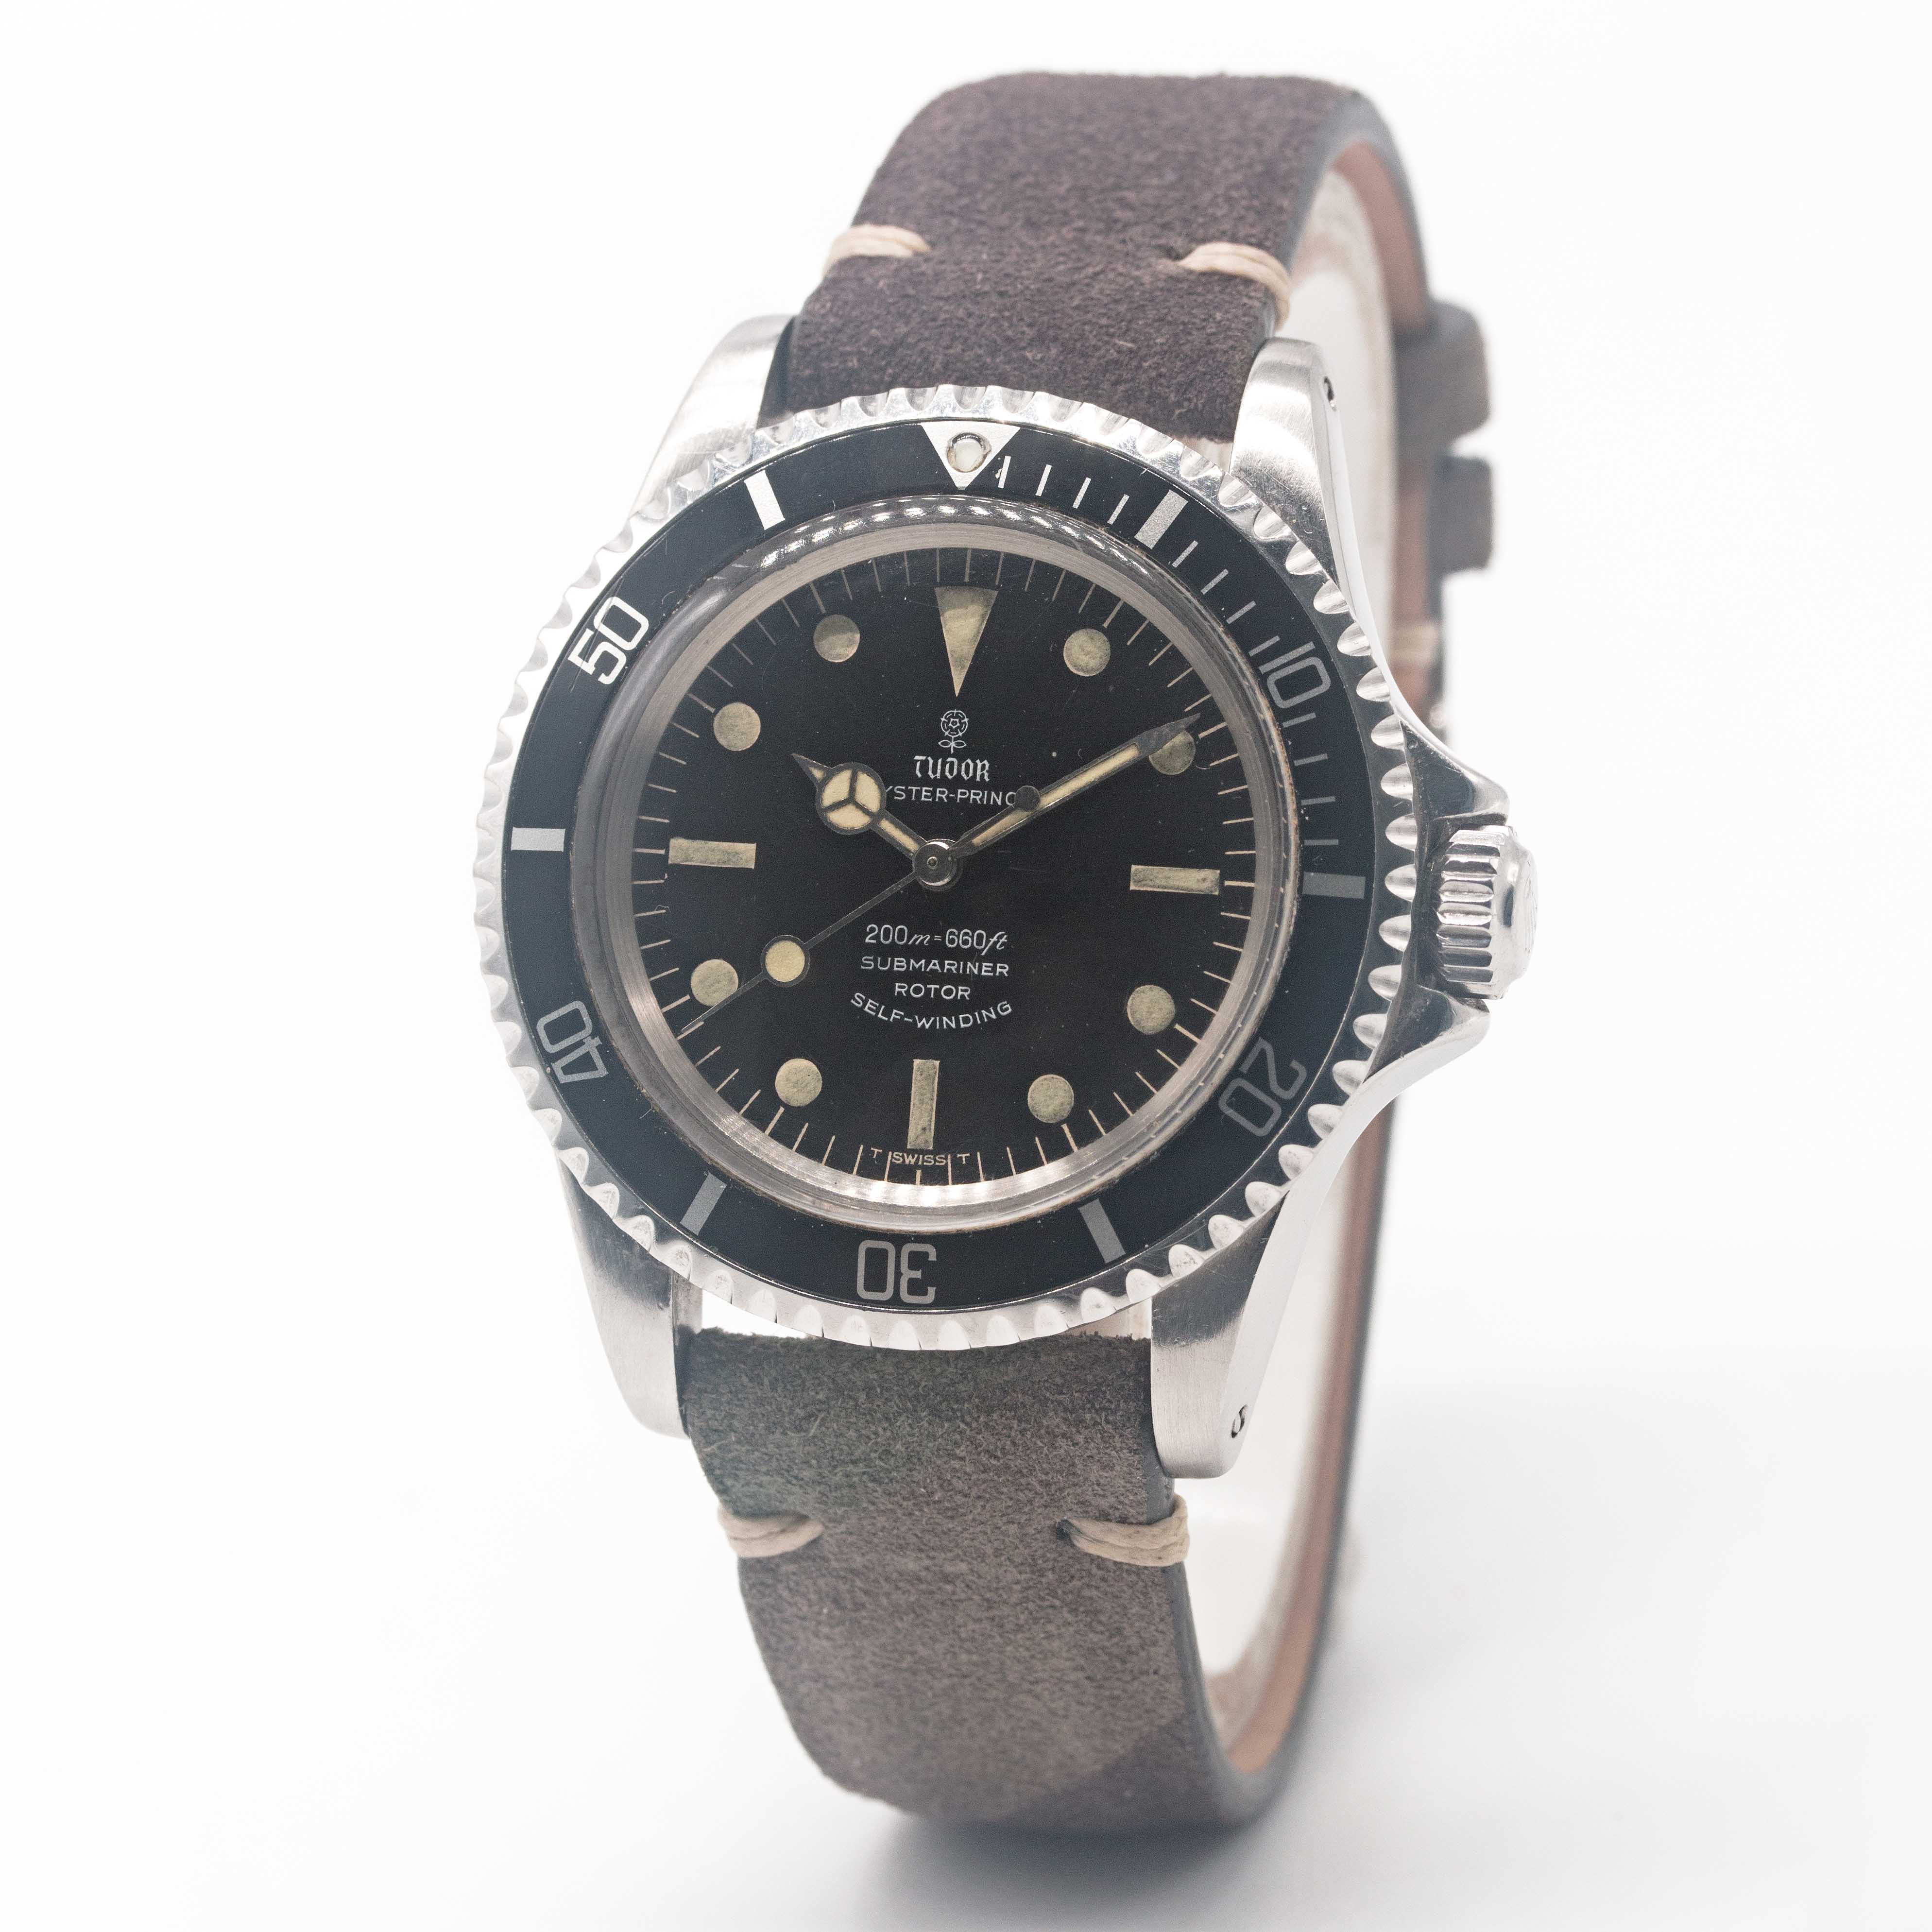 A GENTLEMAN'S STAINLESS STEEL ROLEX TUDOR OYSTER PRINCE SUBMARINER WRIST WATCH CIRCA 1967, REF. - Image 4 of 9